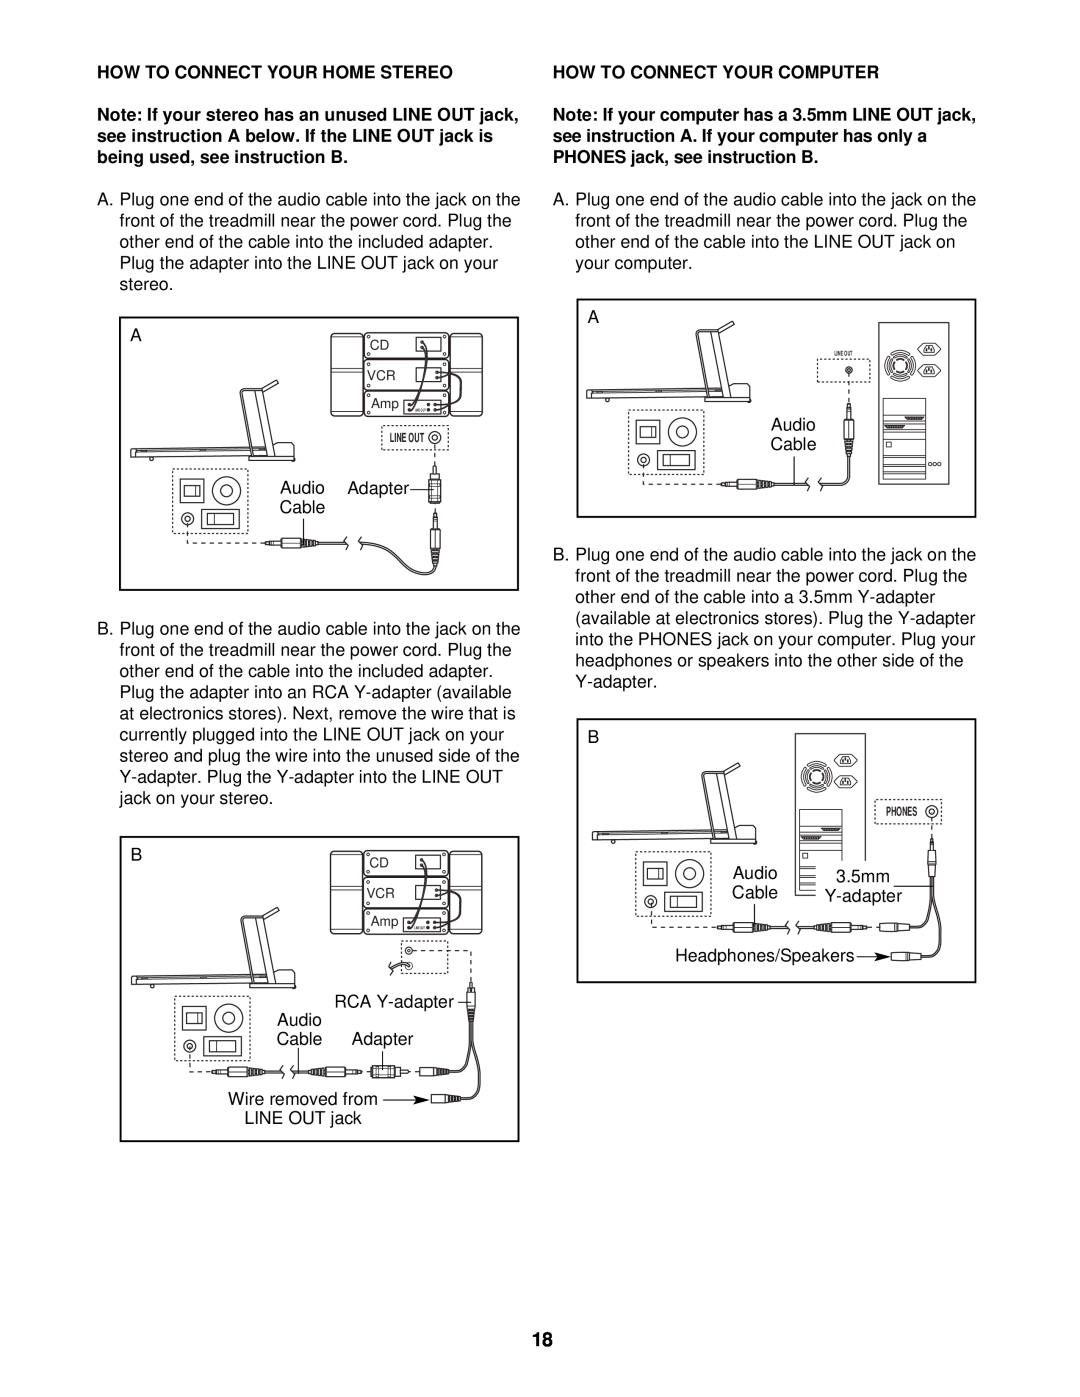 Reebok Fitness RBTL14910 manual How To Connect Your Home Stereo, How To Connect Your Computer, Line Out 